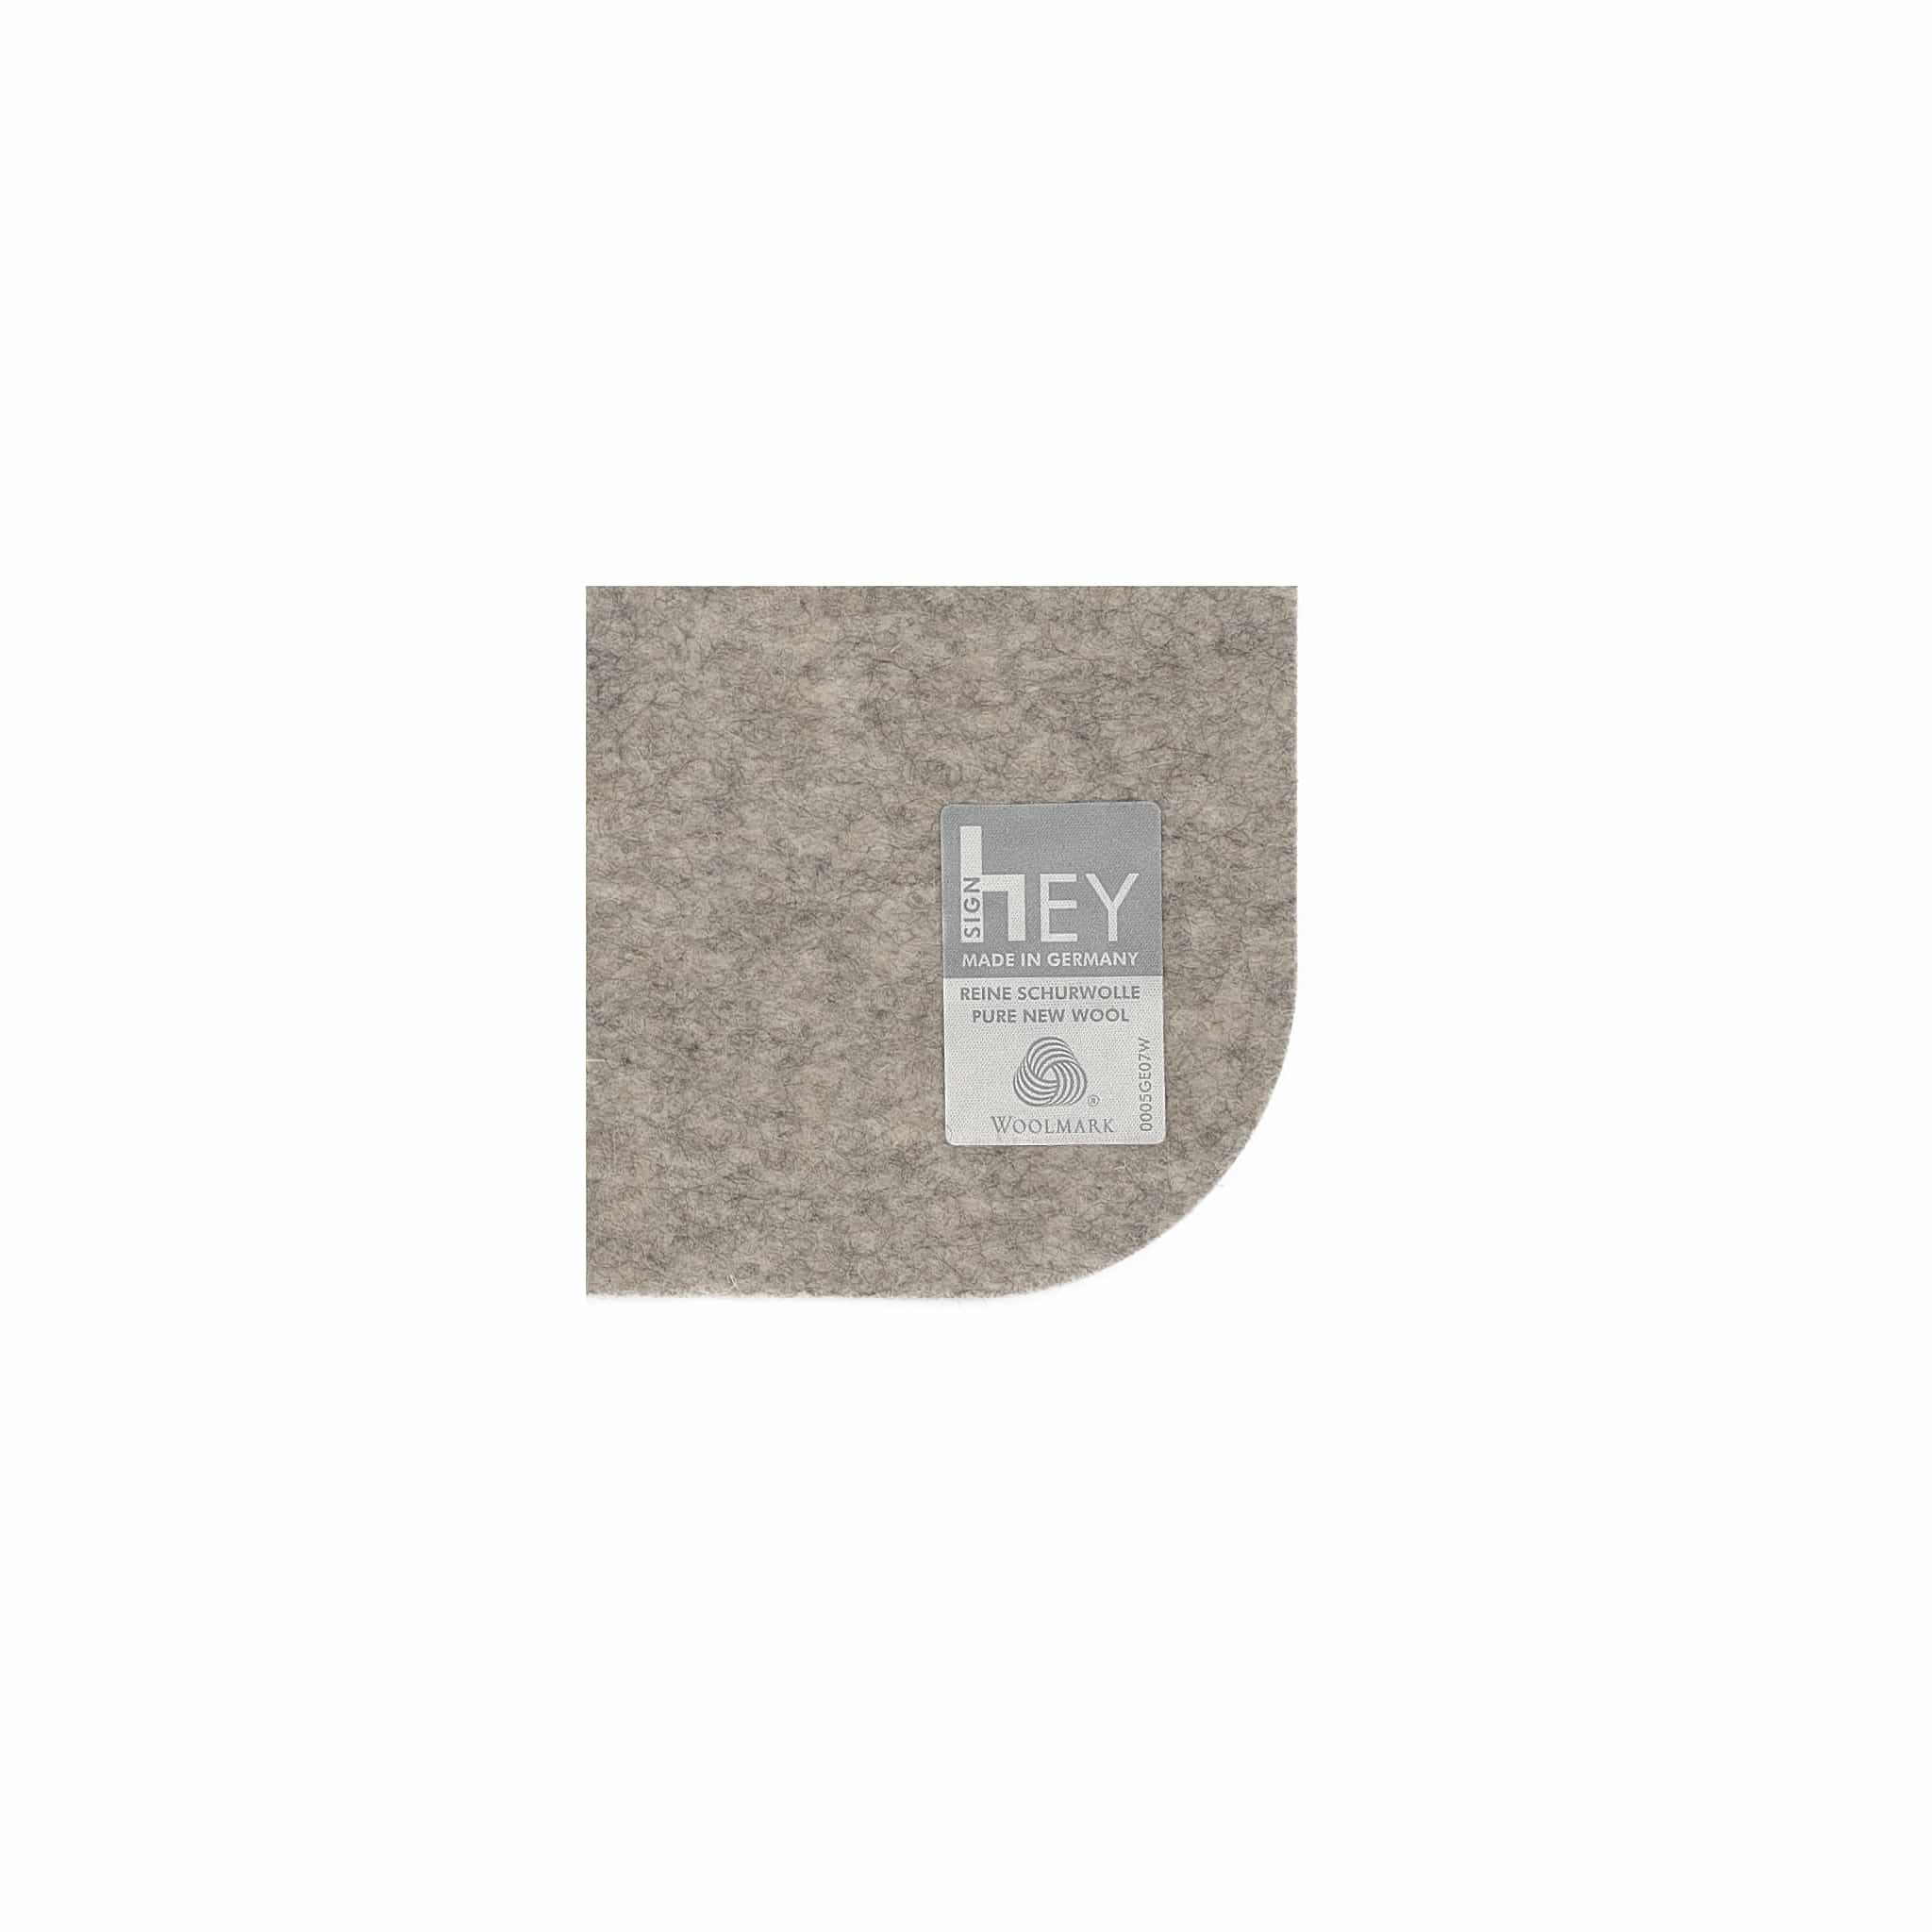 Rectangular Felt Placemat in Light-Grey by Hey-Sign 300134507 looking at Closeup-Label